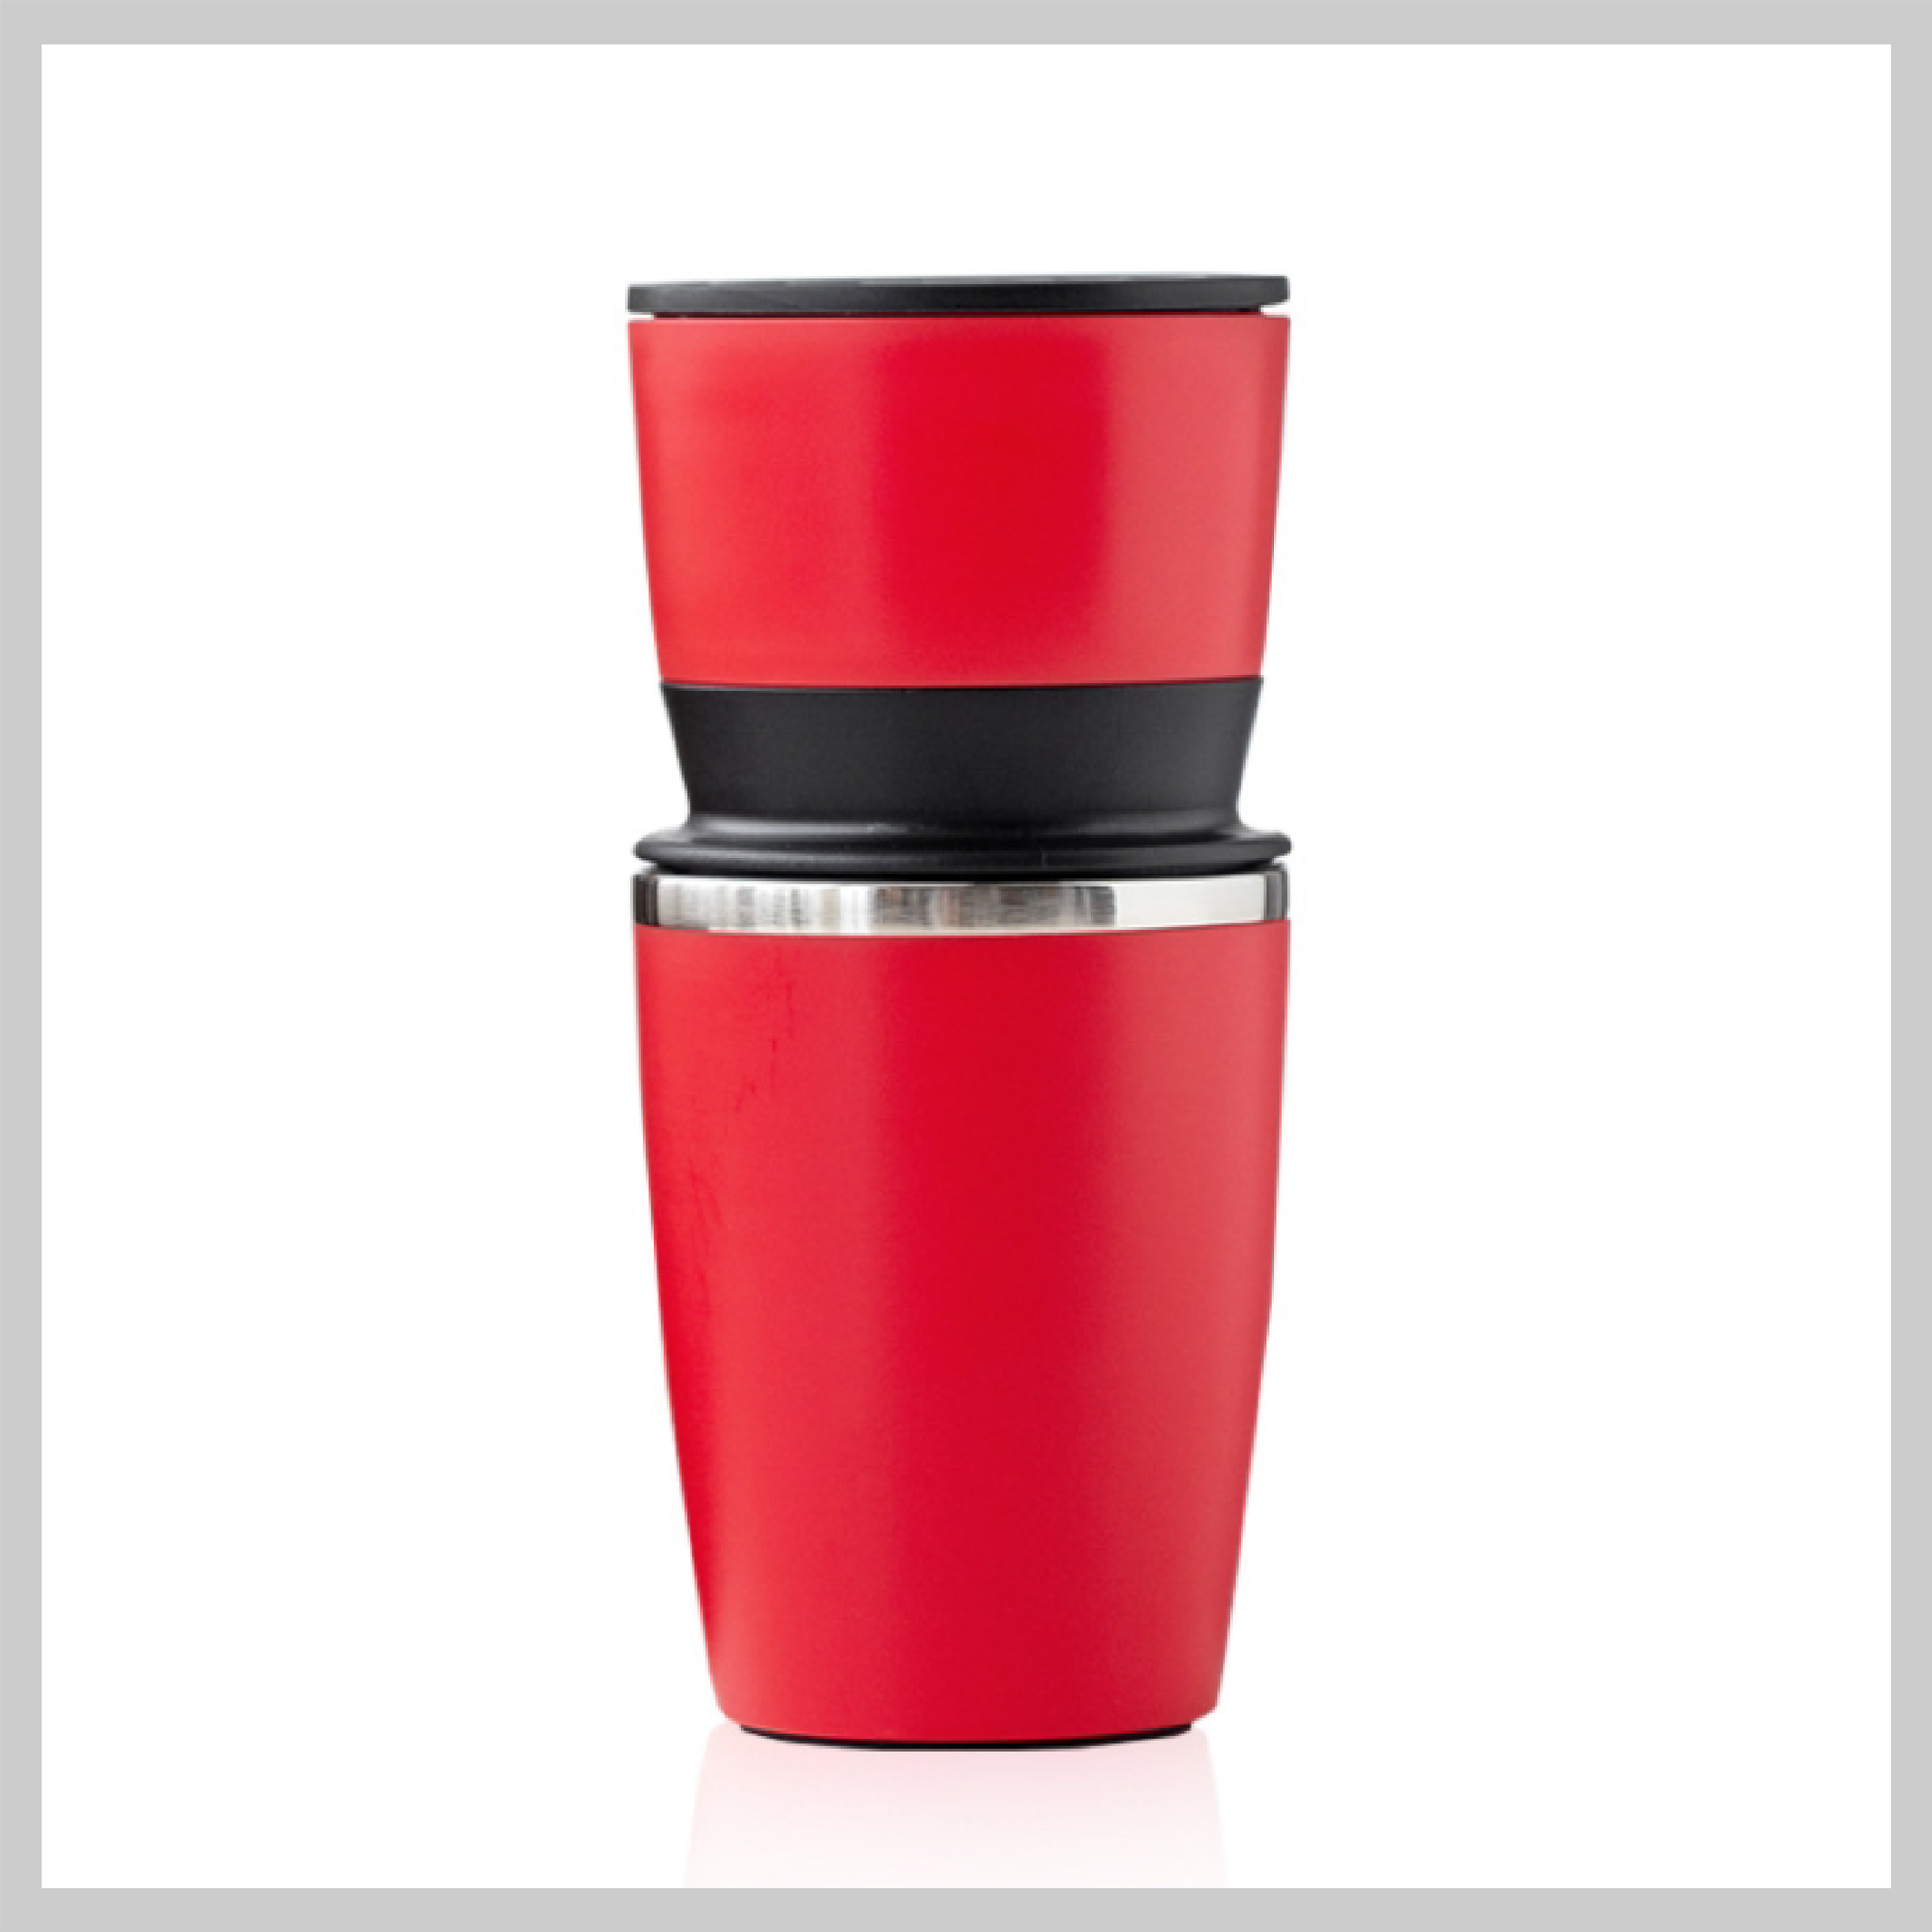 Portable Coffee Beans Grinder (Red)